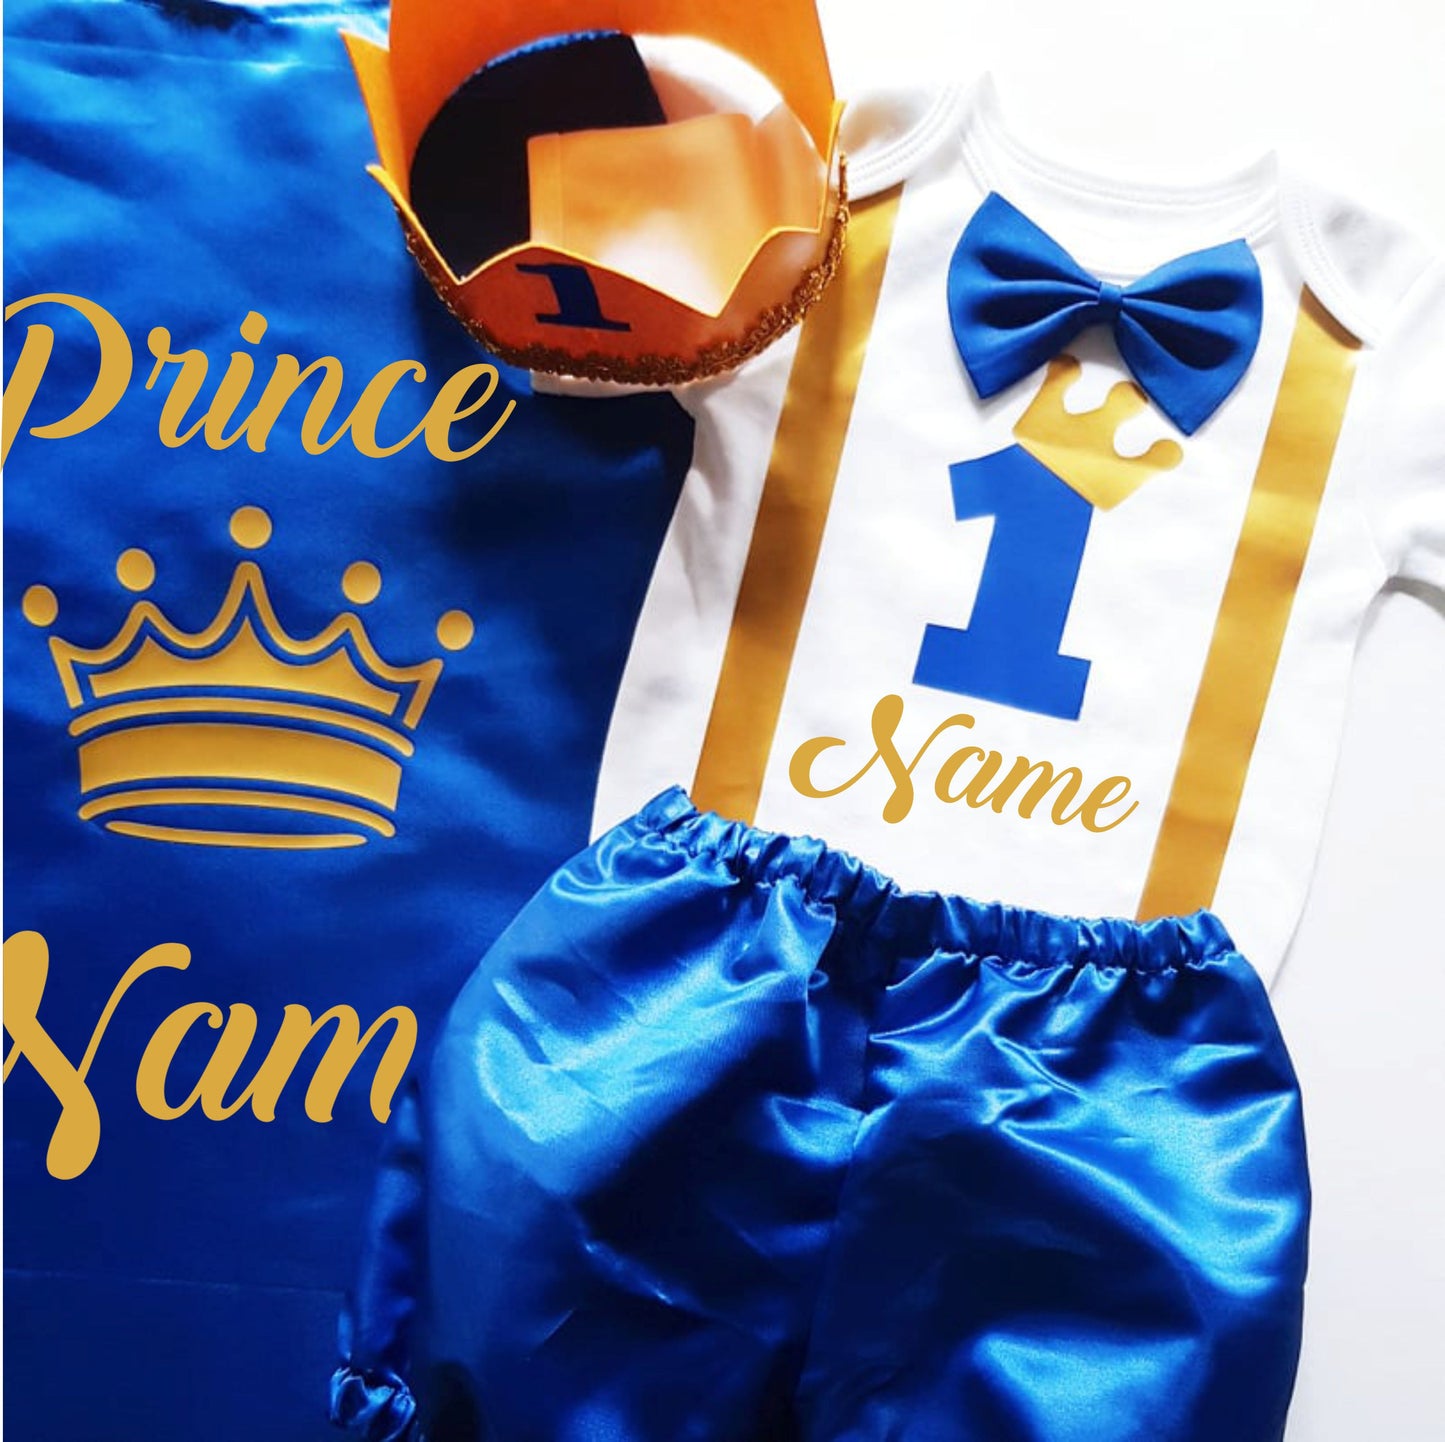 Baby Little Prince with Name Print Complete Set with Crown - Royal Blue - MYSTYLEMYCLOTHING